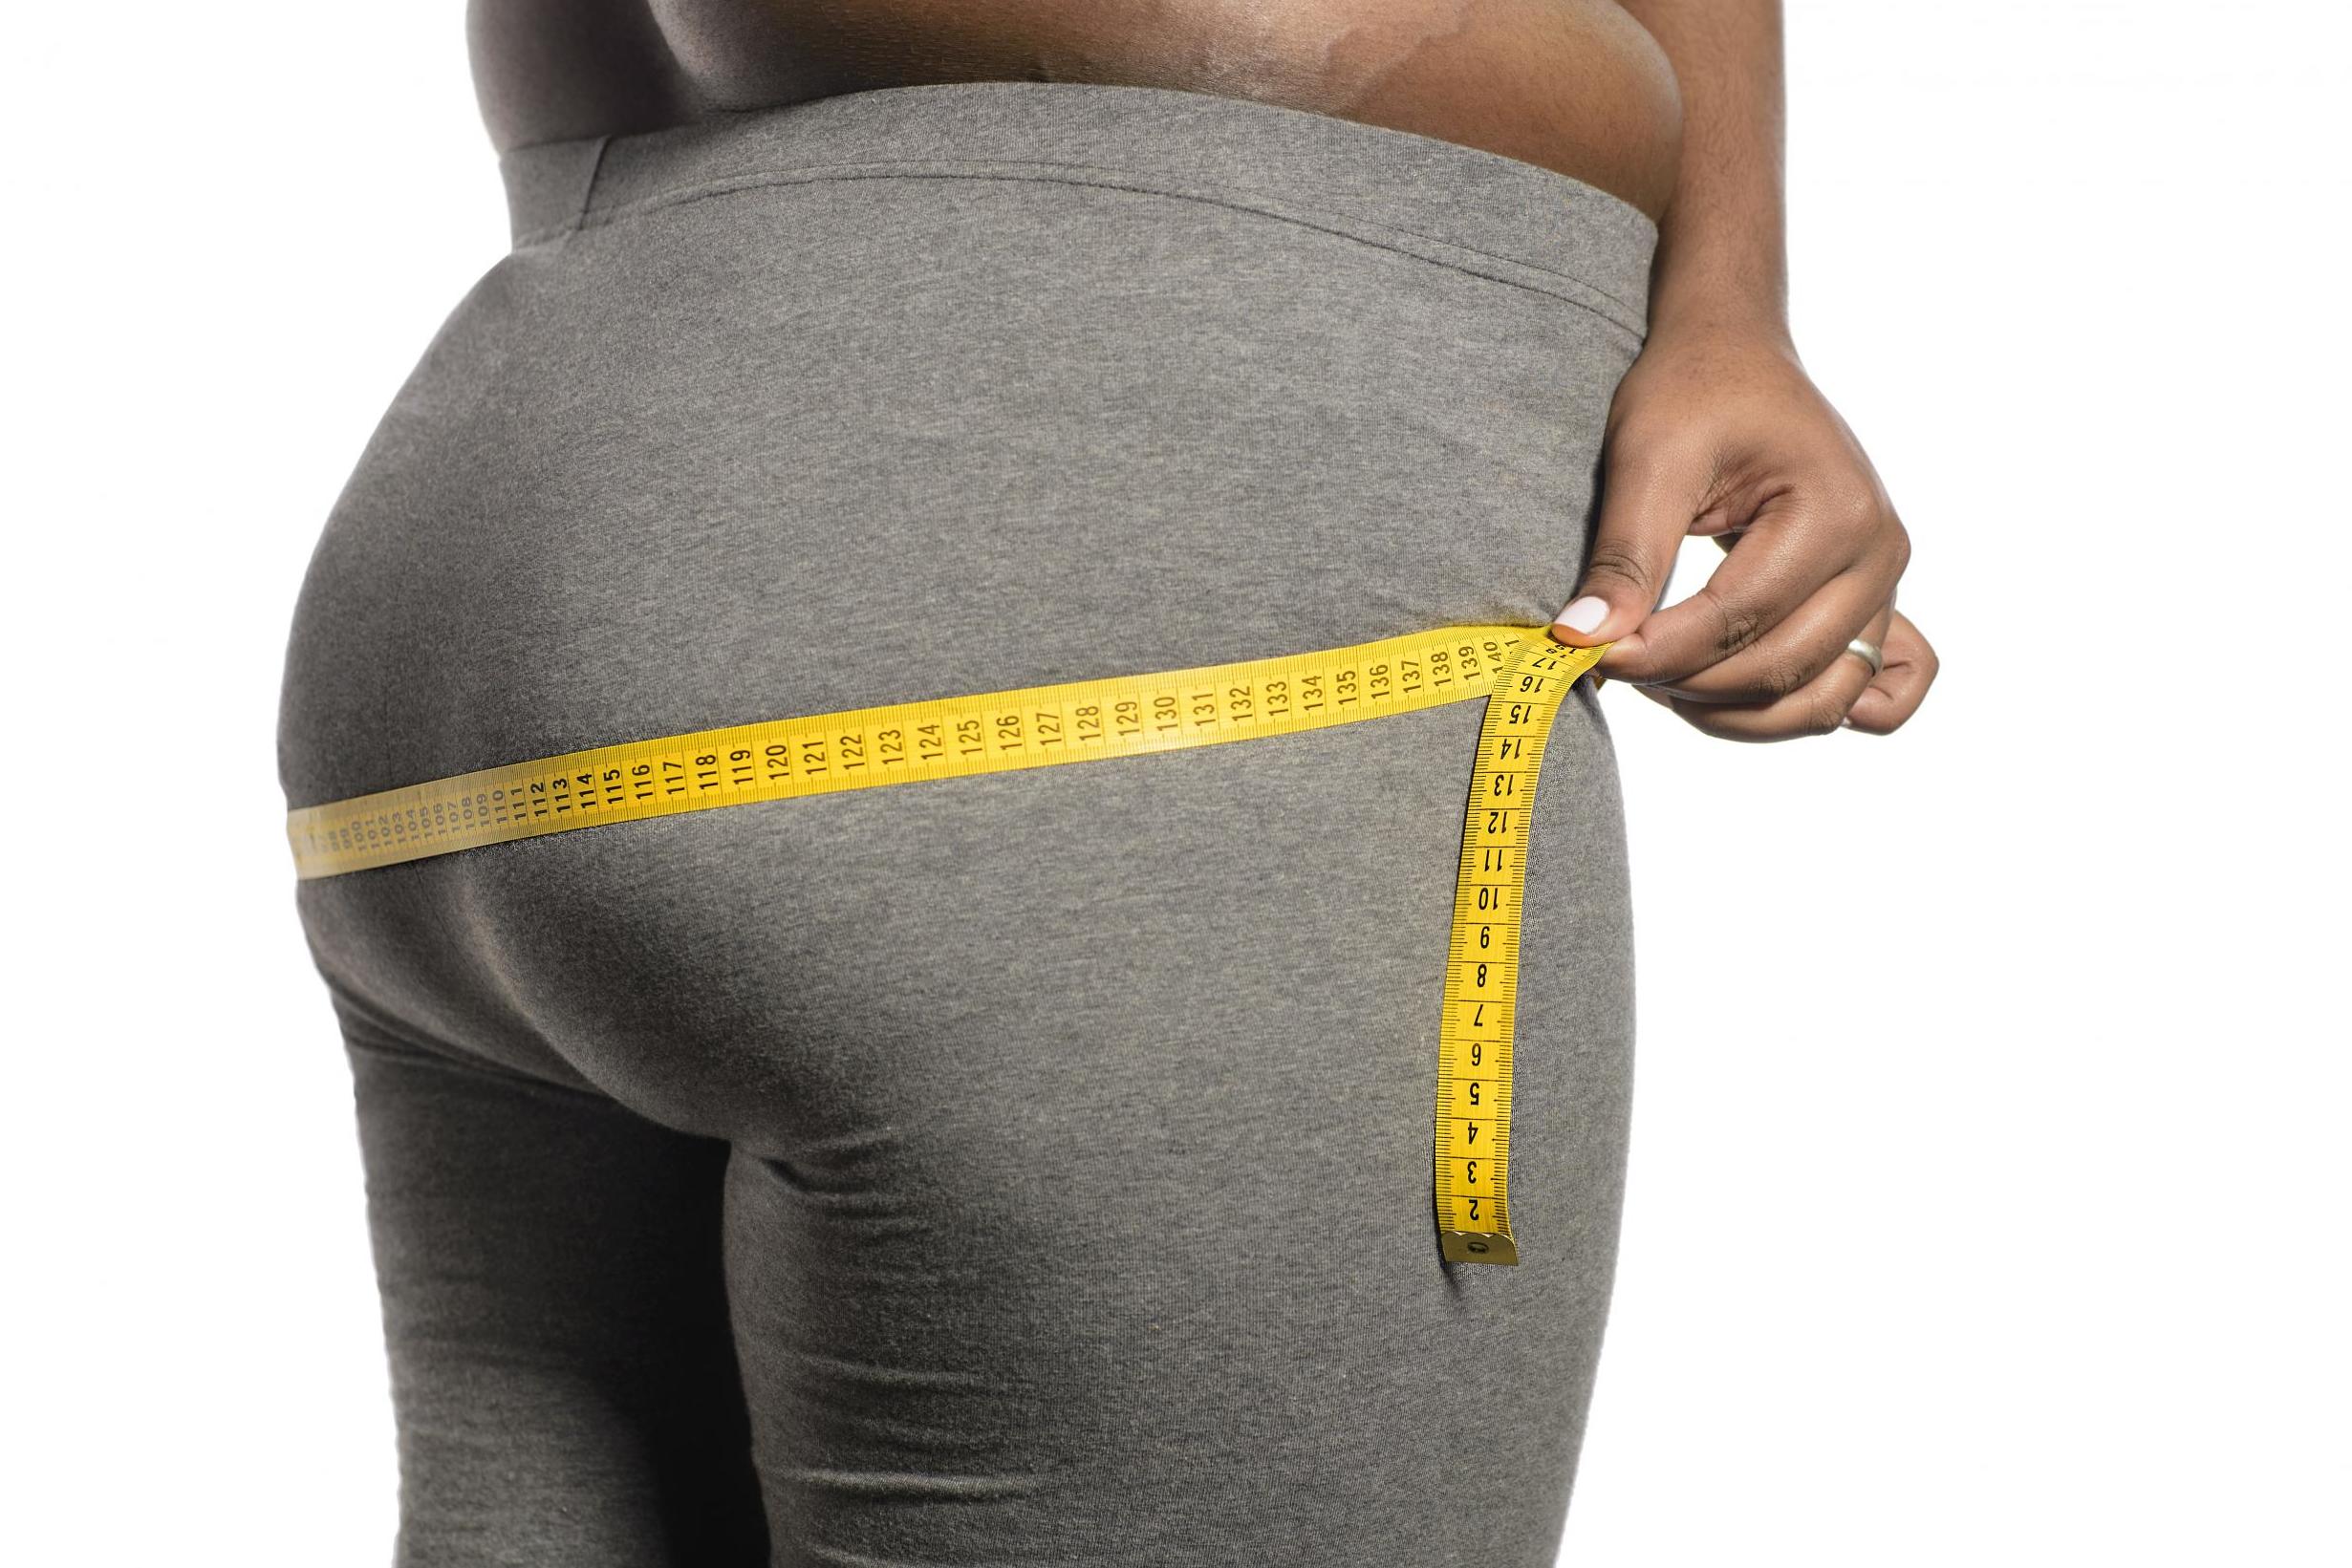 Pear-shaped women benefit from better health, finds study, The Independent